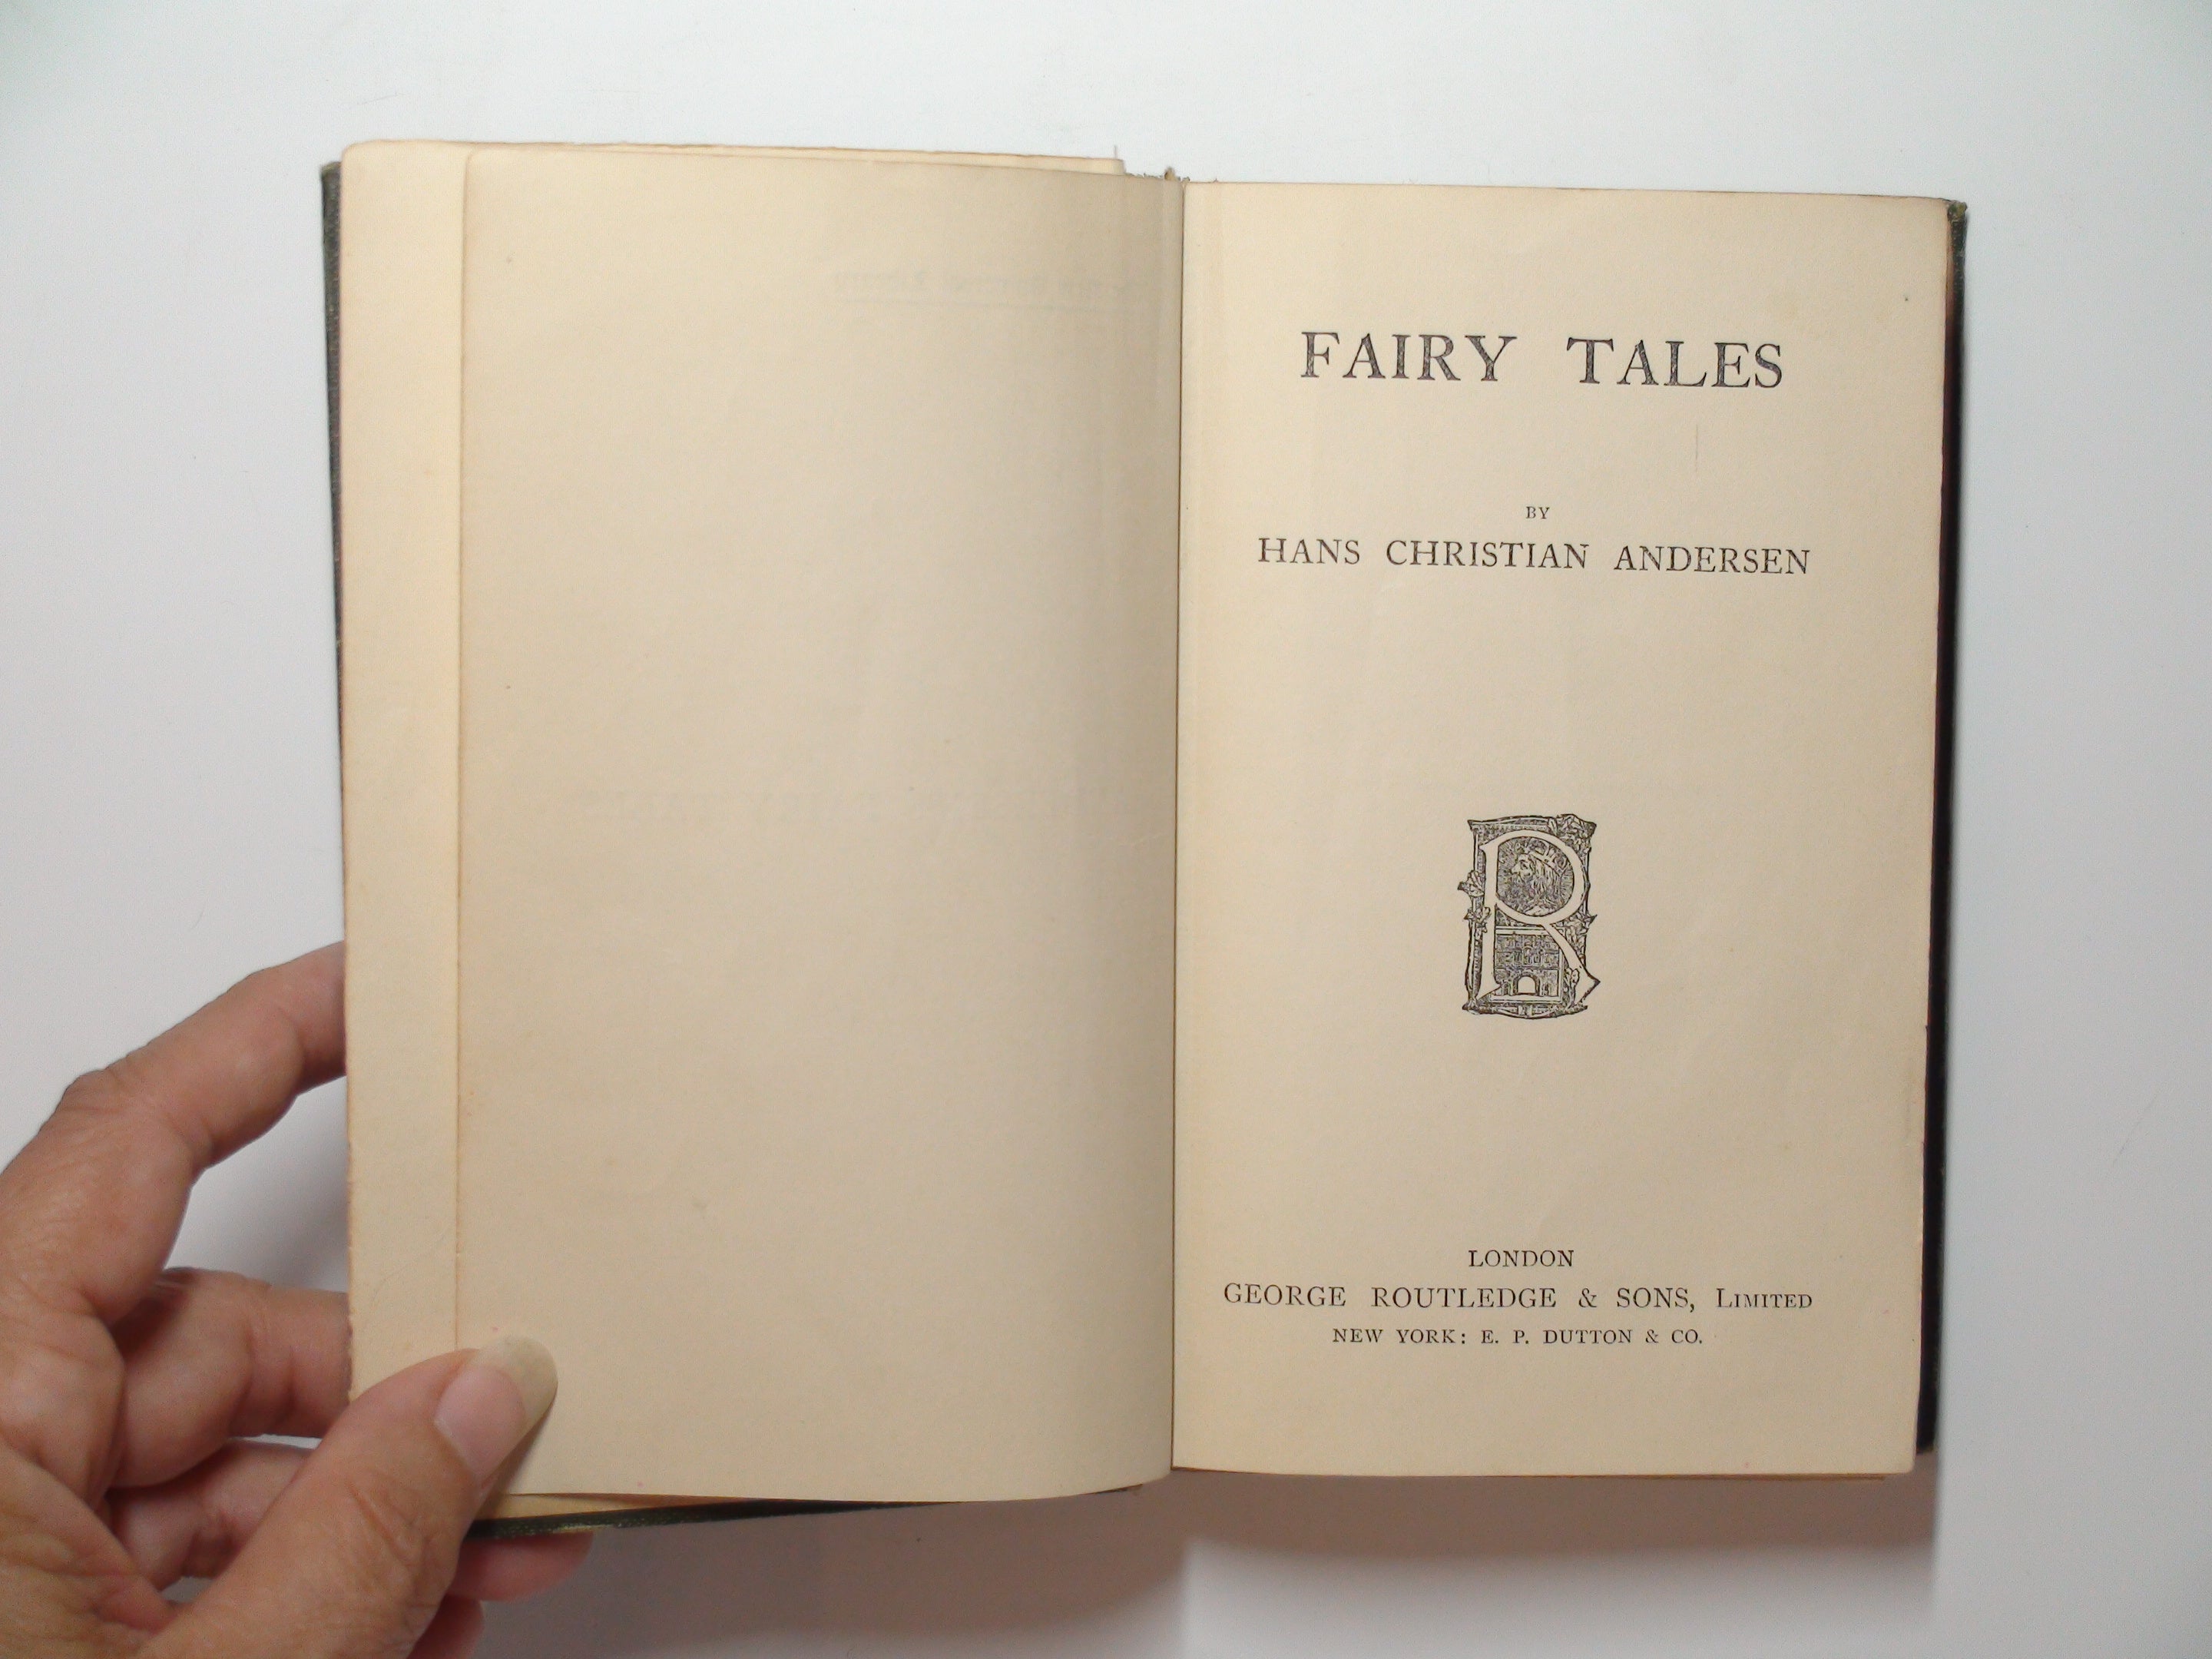 Fairy Tales by Hans Christian Andersen, George Routledge & Sons, 1905